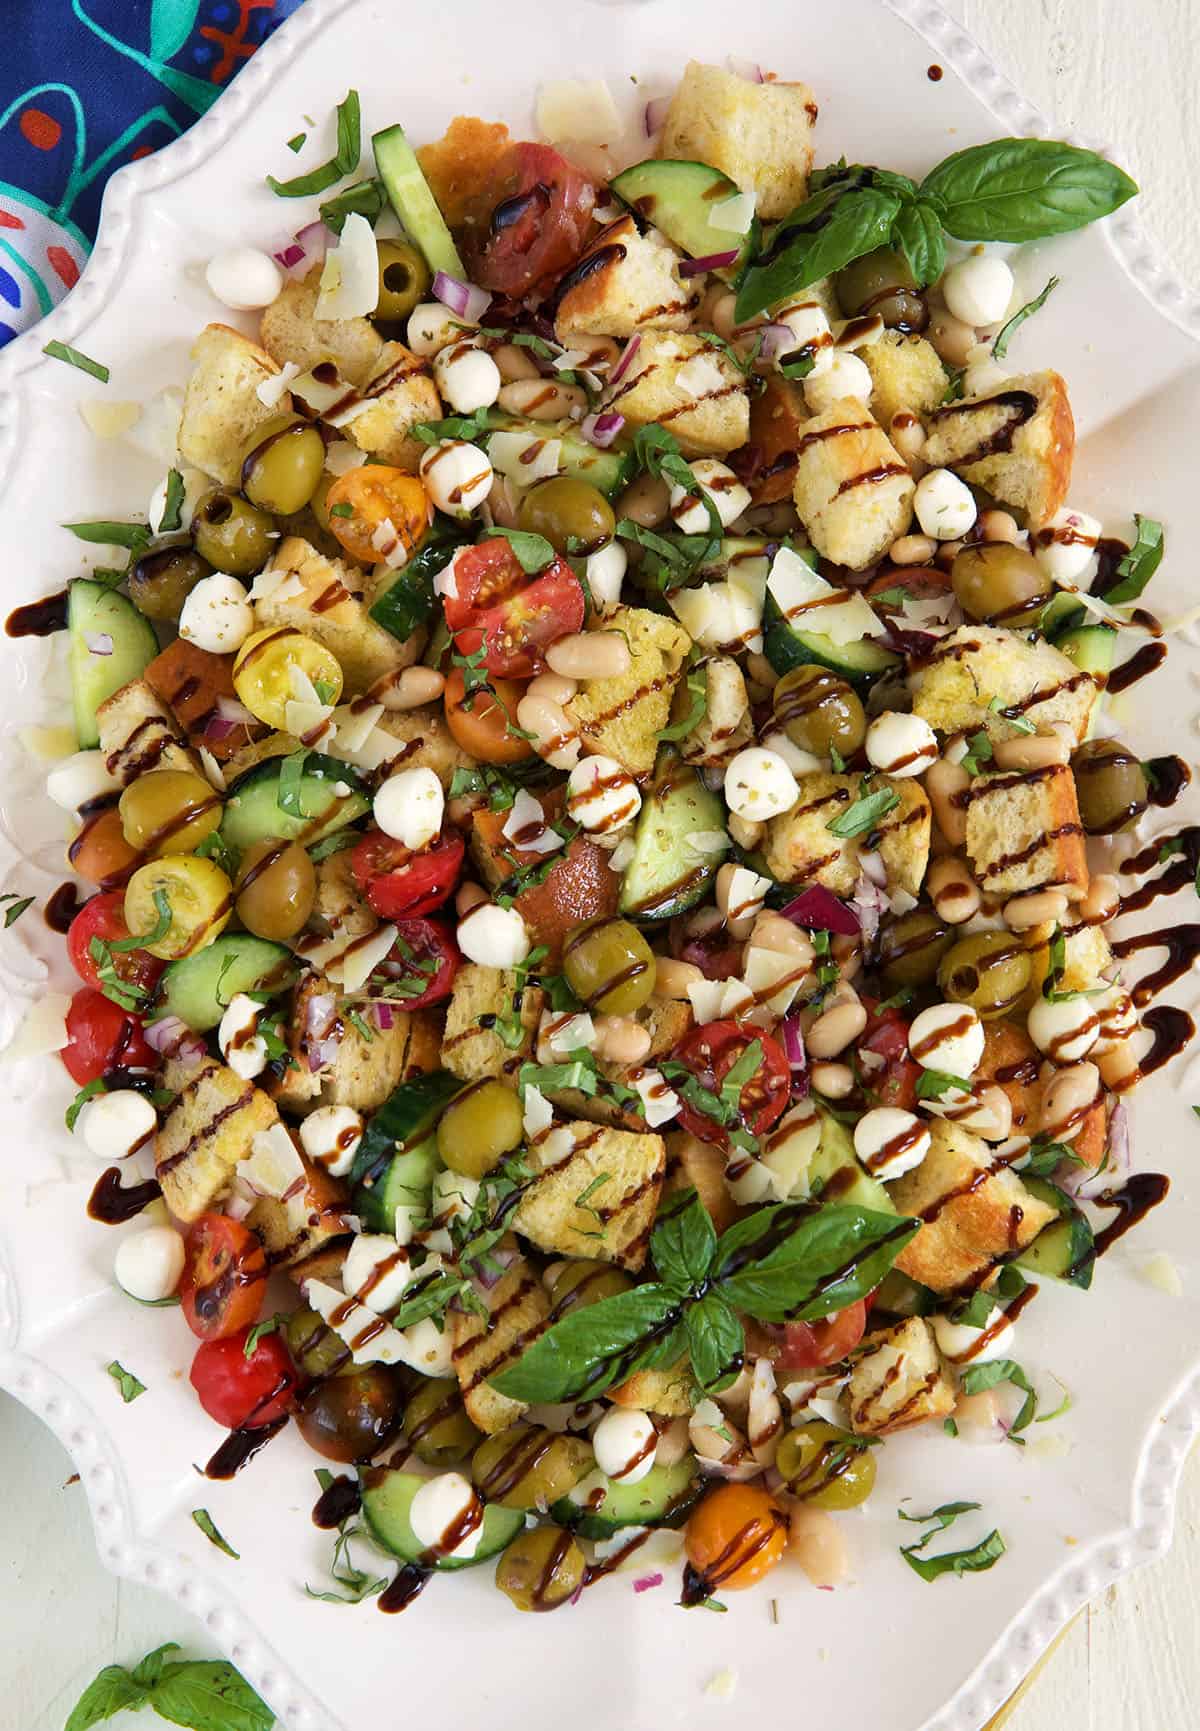 Balsamic reduction is drizzled all over panzanella salad. 